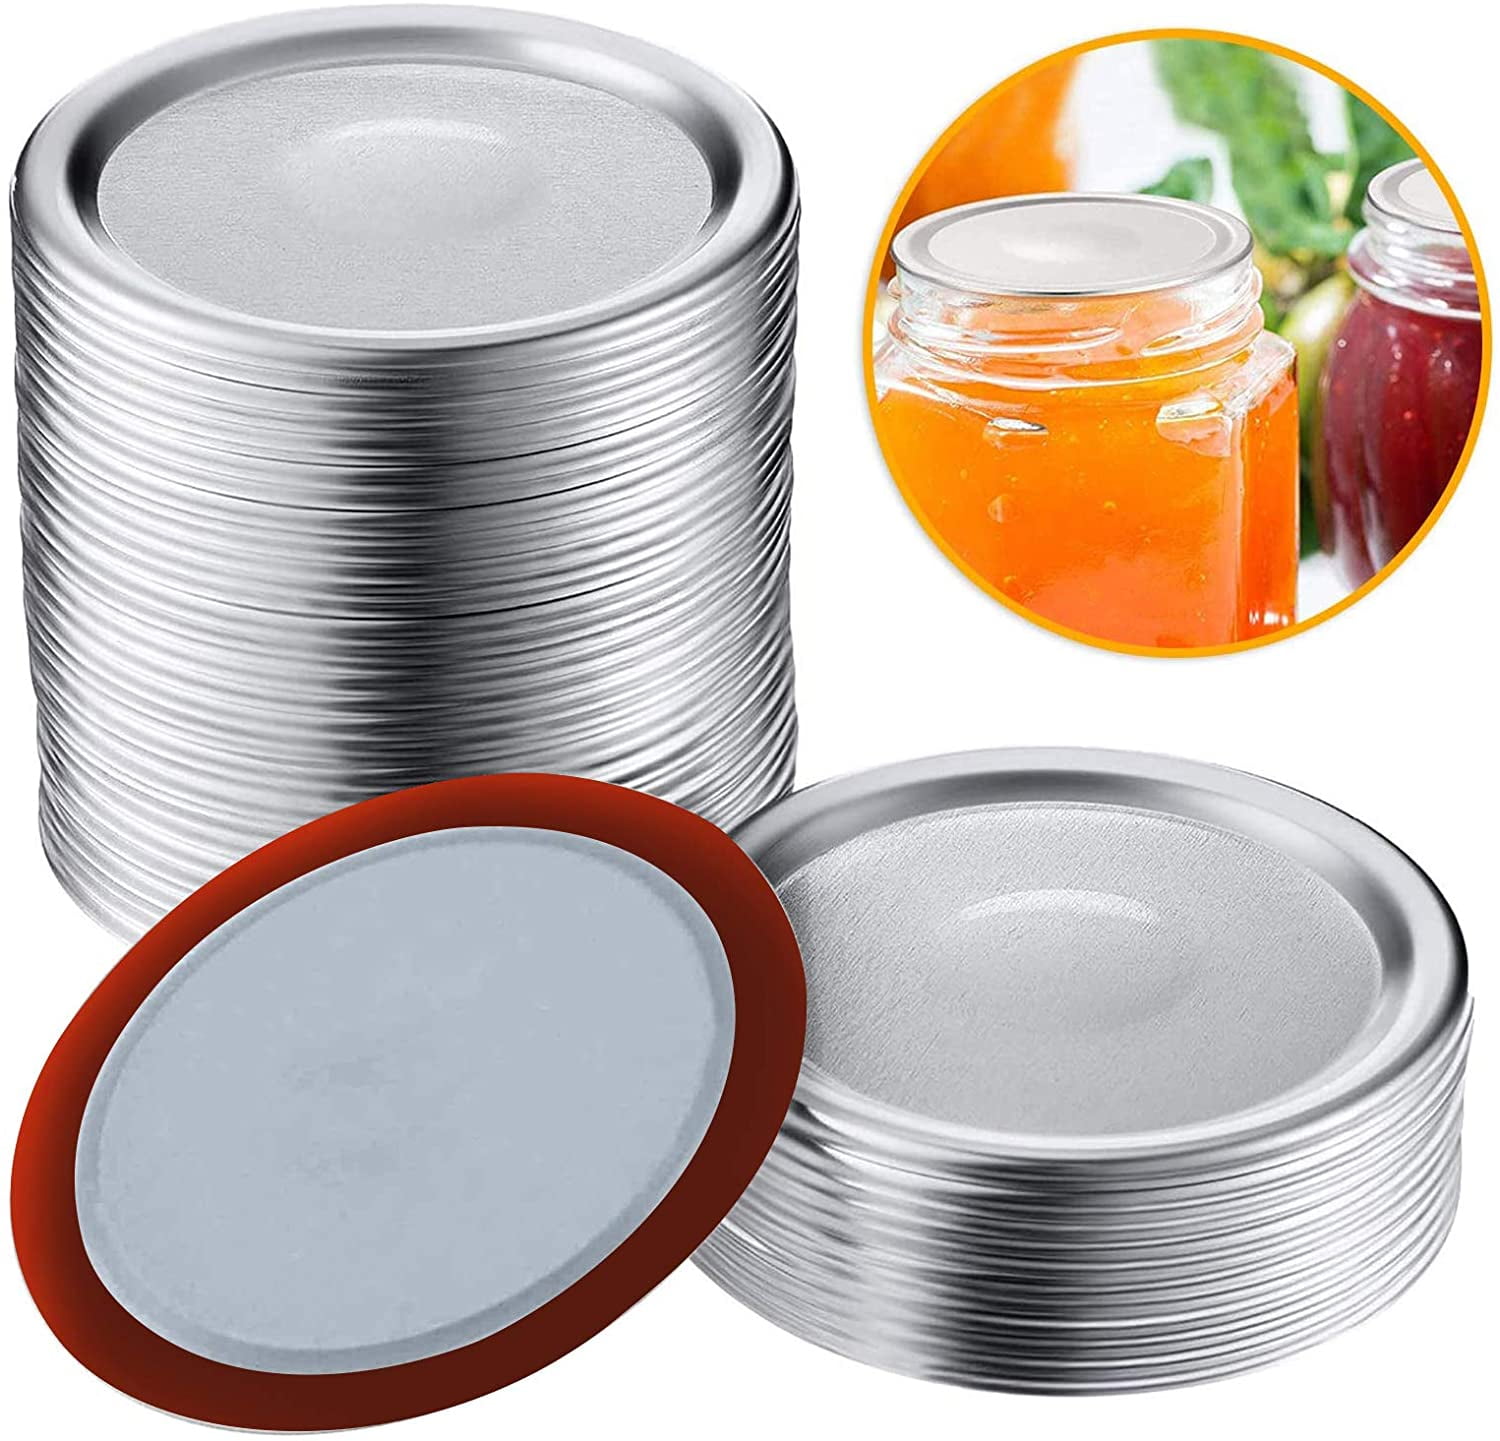 Canning Lids Regular Mouth For Ball/Kerr Jars 24 Count Split-Type Metal Mason Jar Lids with Silicone Seals Silver 